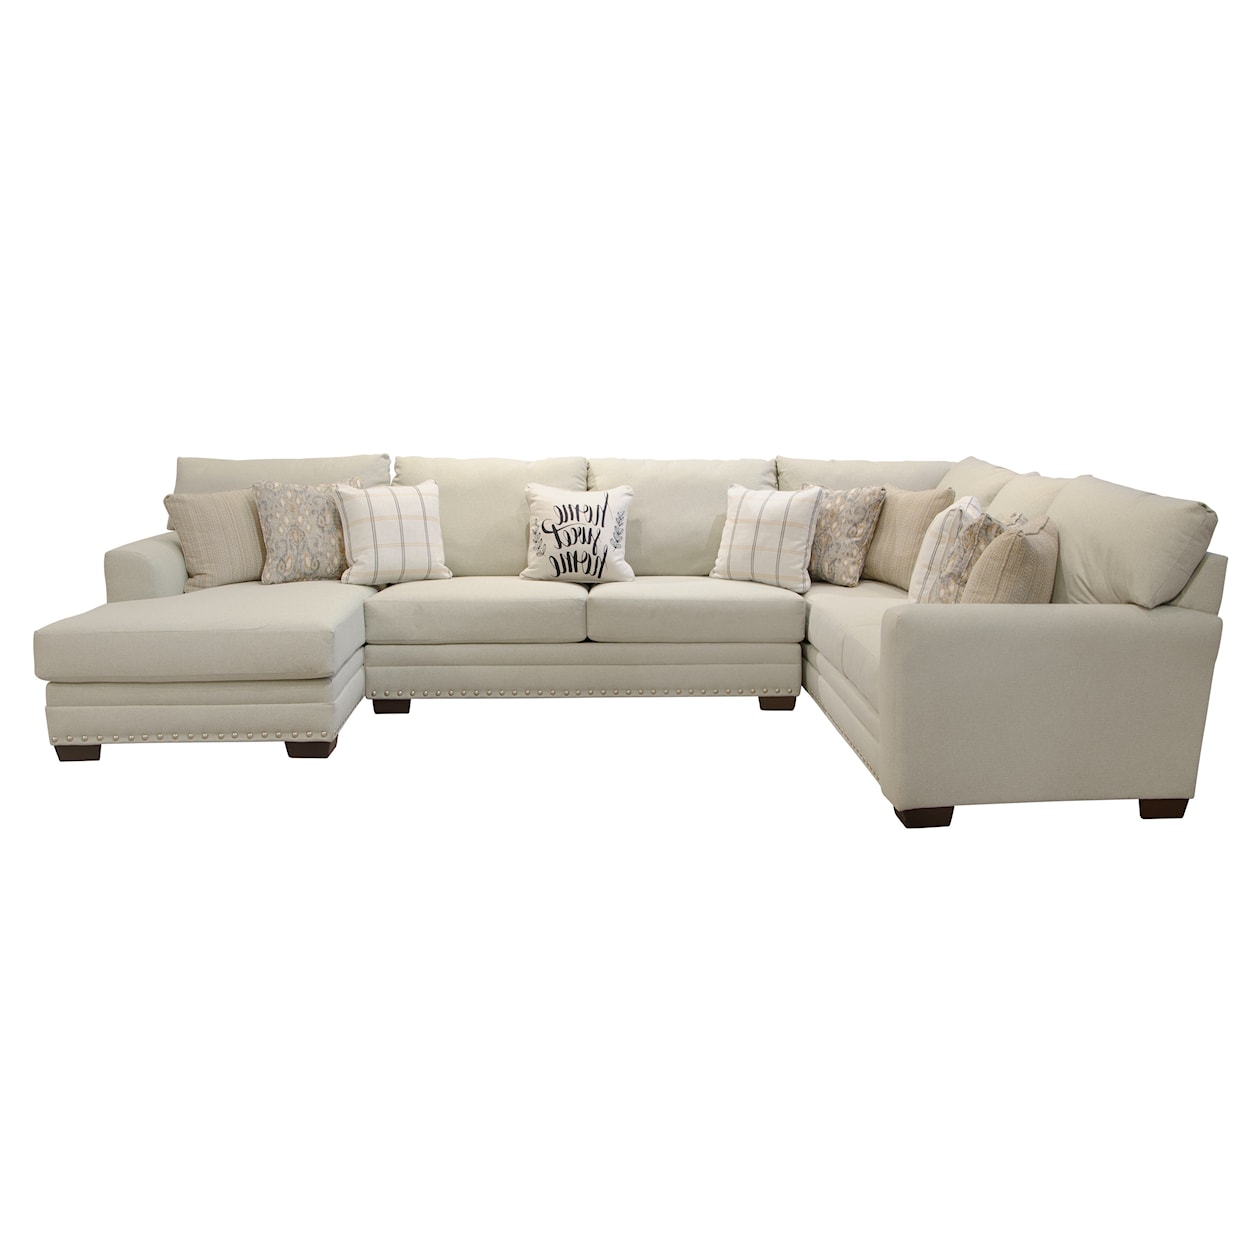 Cottage Chic Beige Piece Left Arm Facing Sectional Bob's, 47% OFF